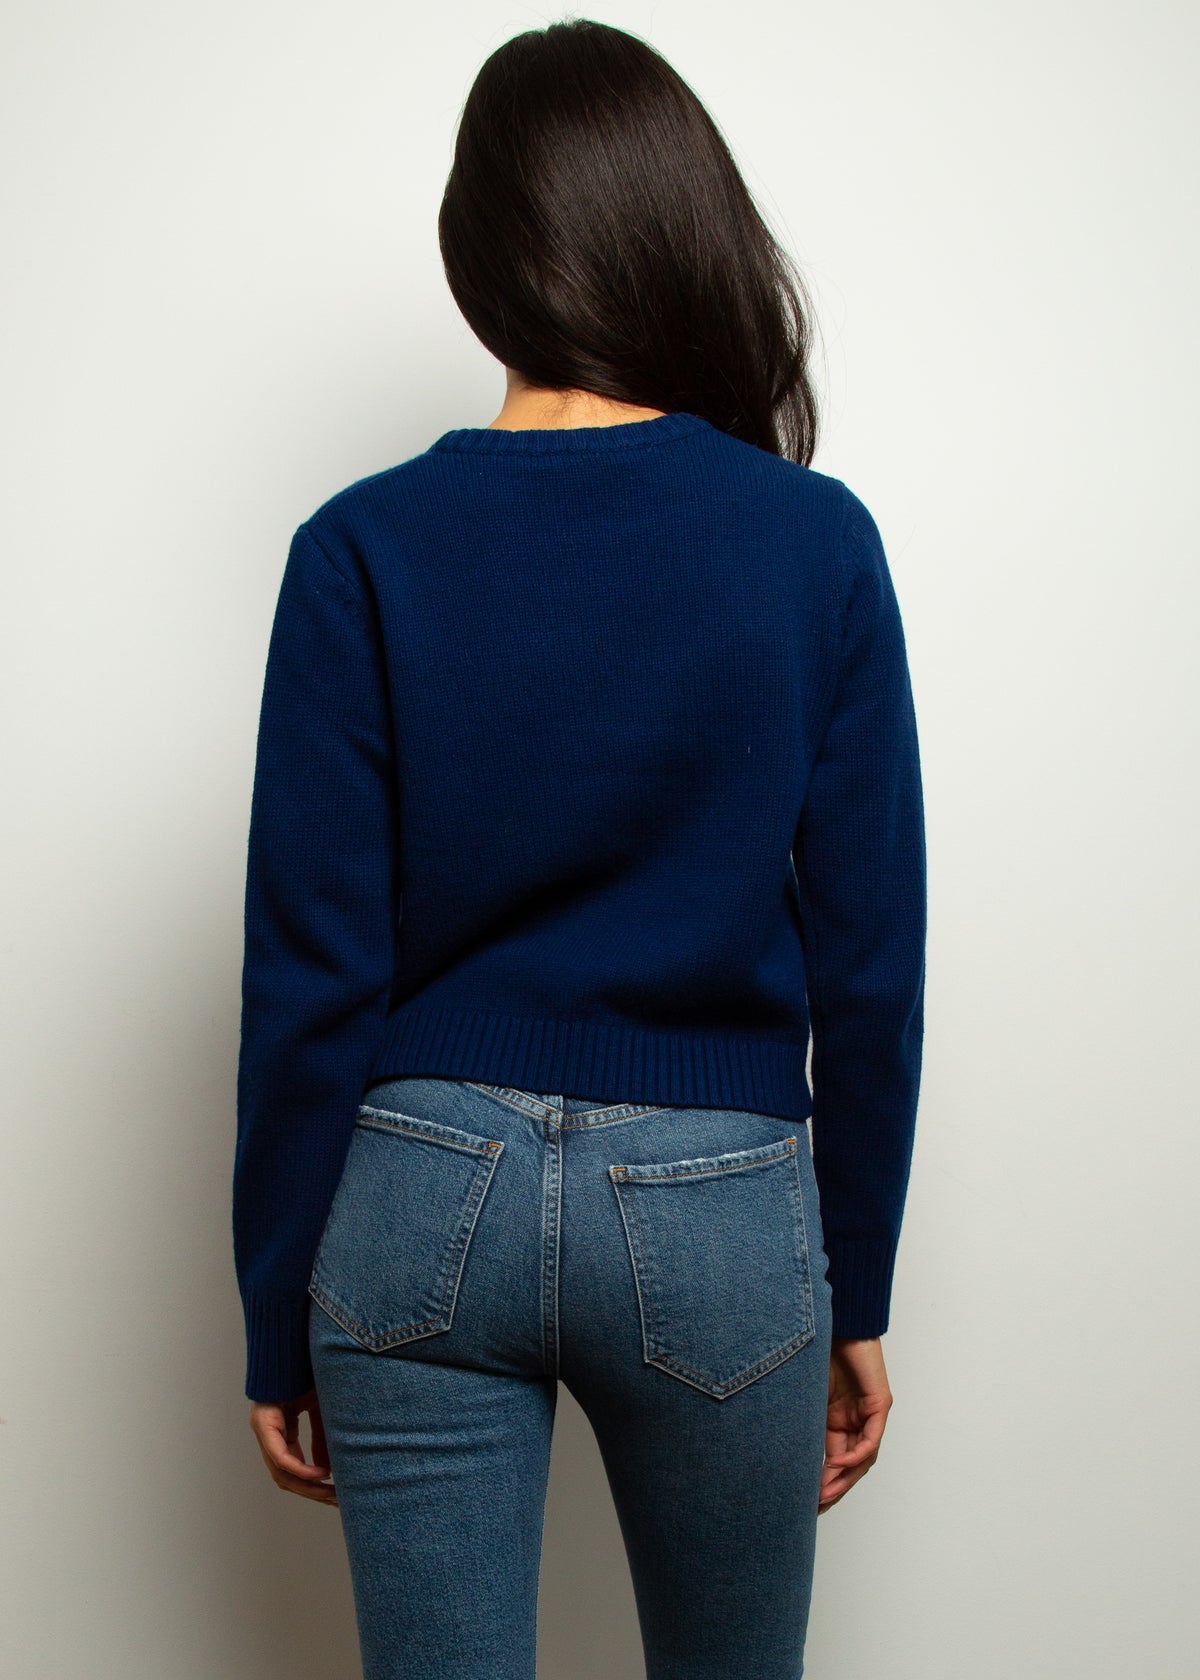 BF Cropped Art Jumper in Navy